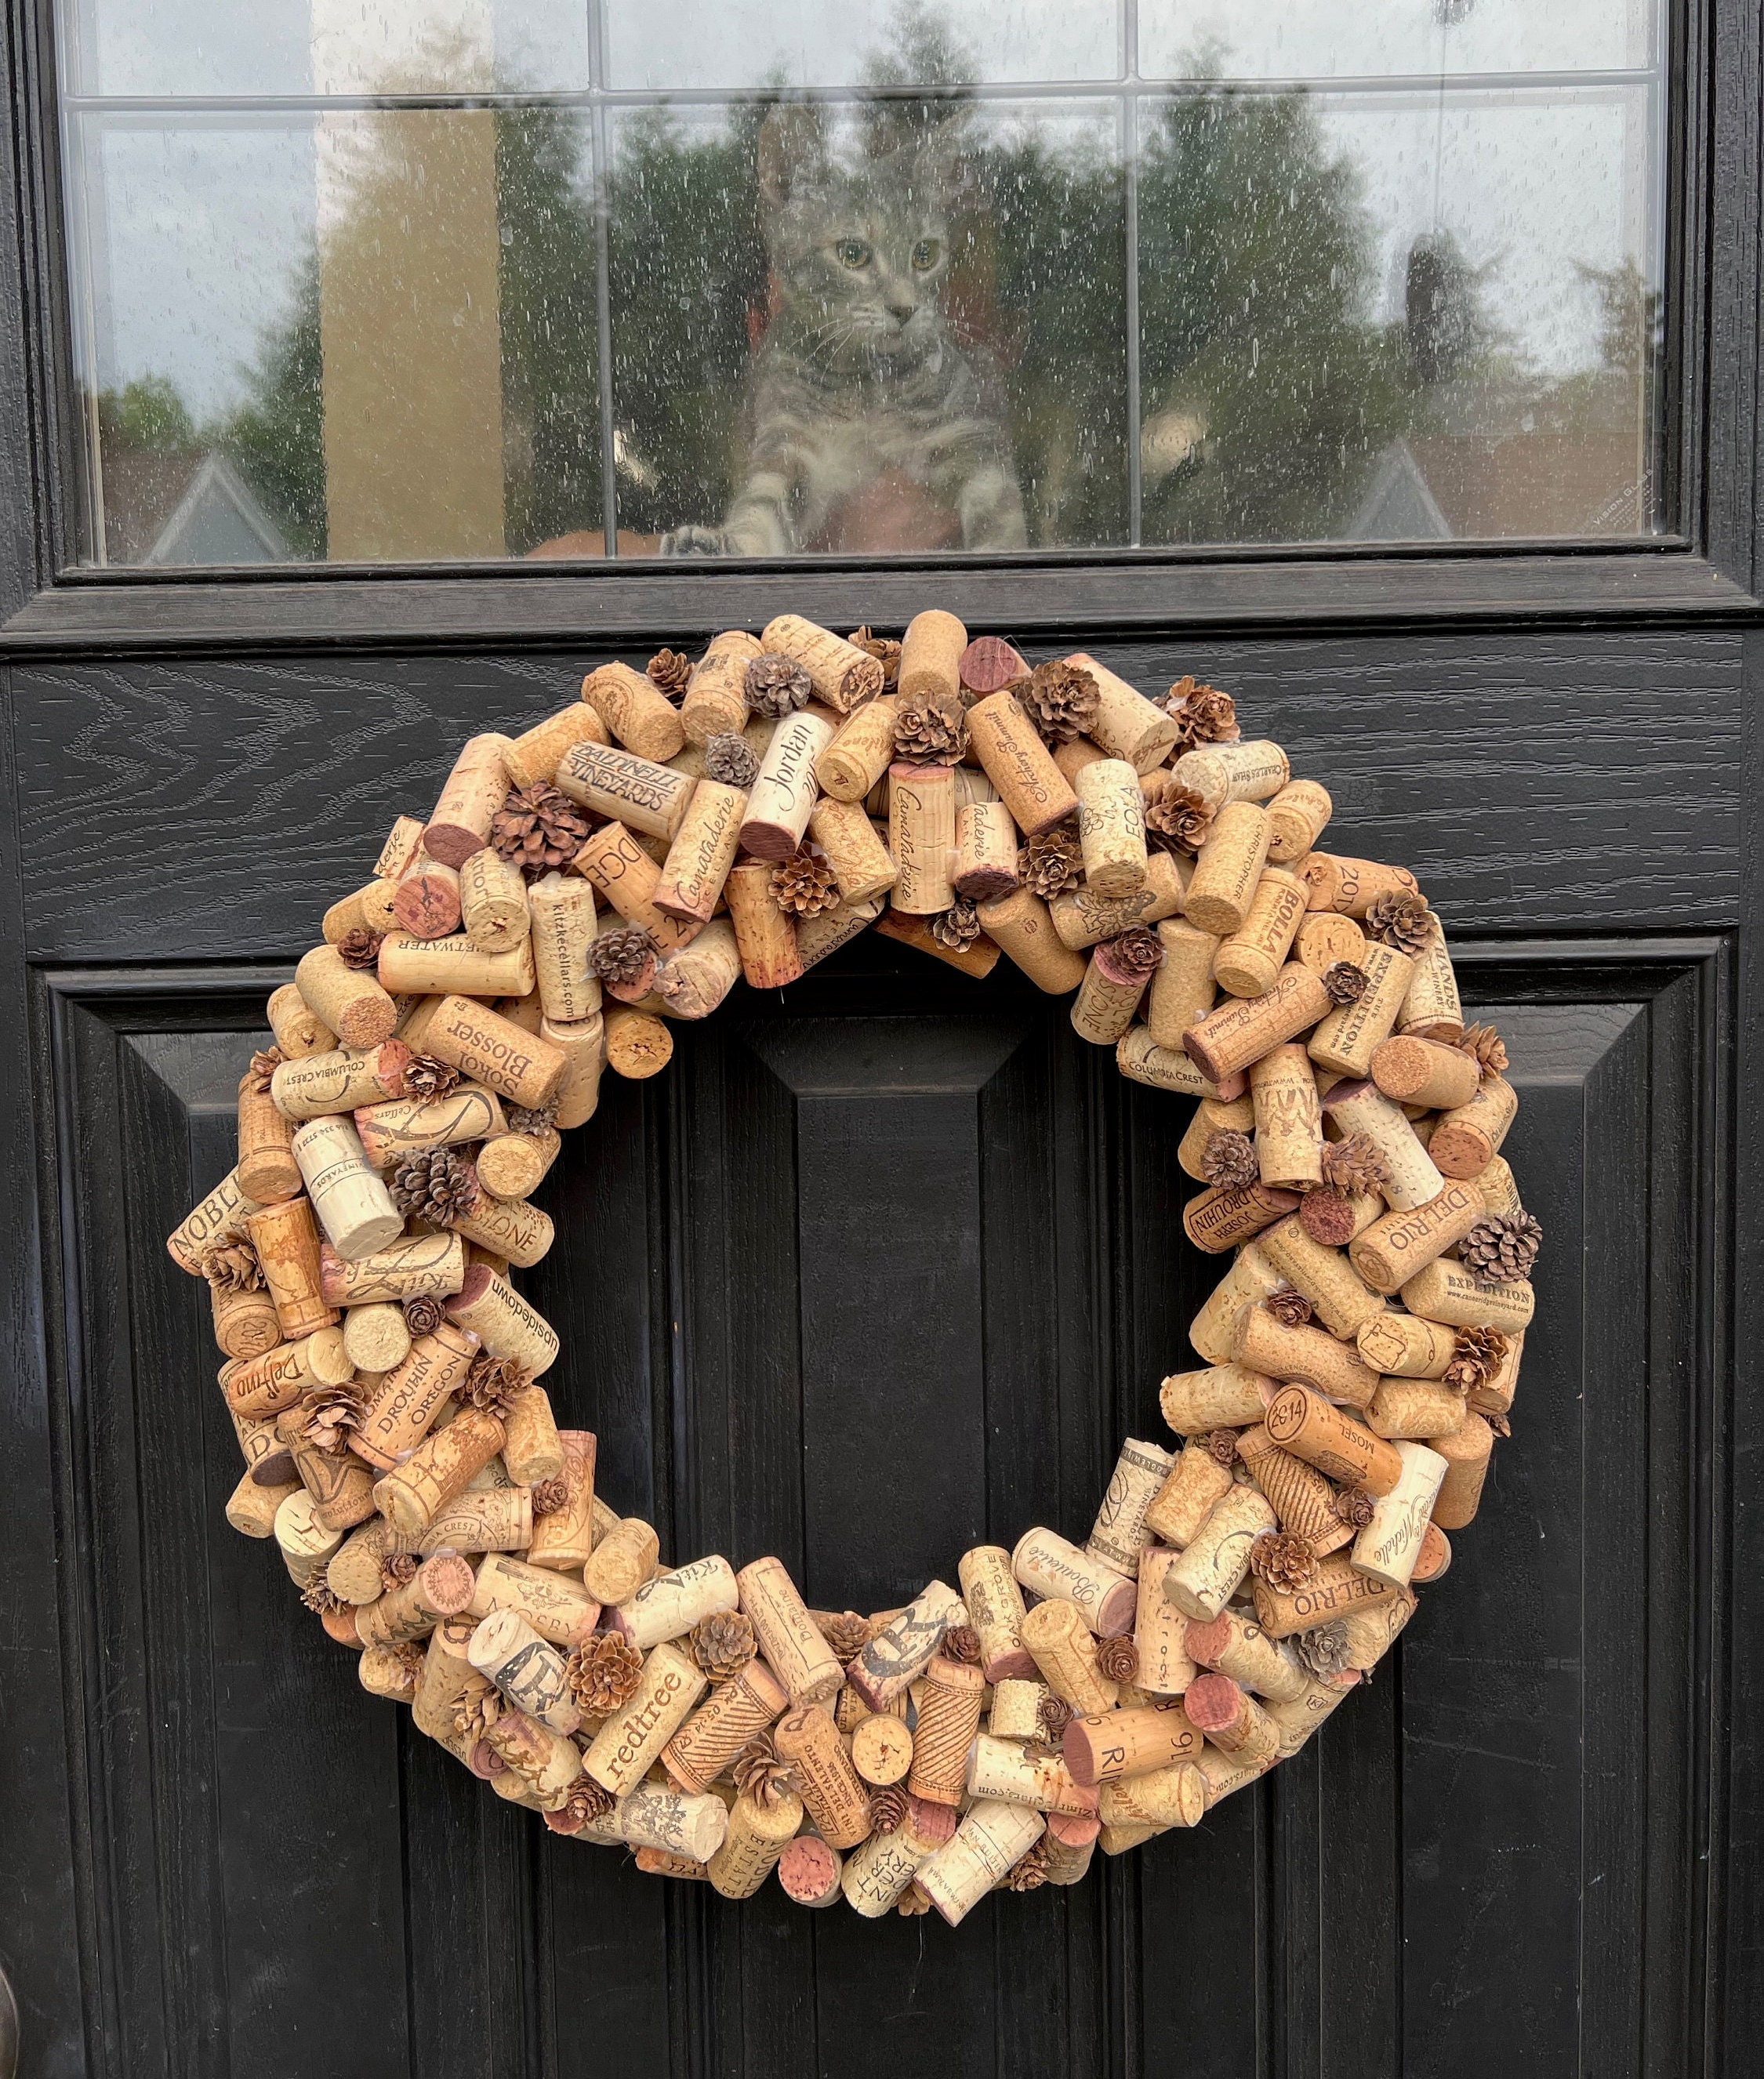 How to Make an Upcycled Wine Cork Wreath - My Humble Home and Garden